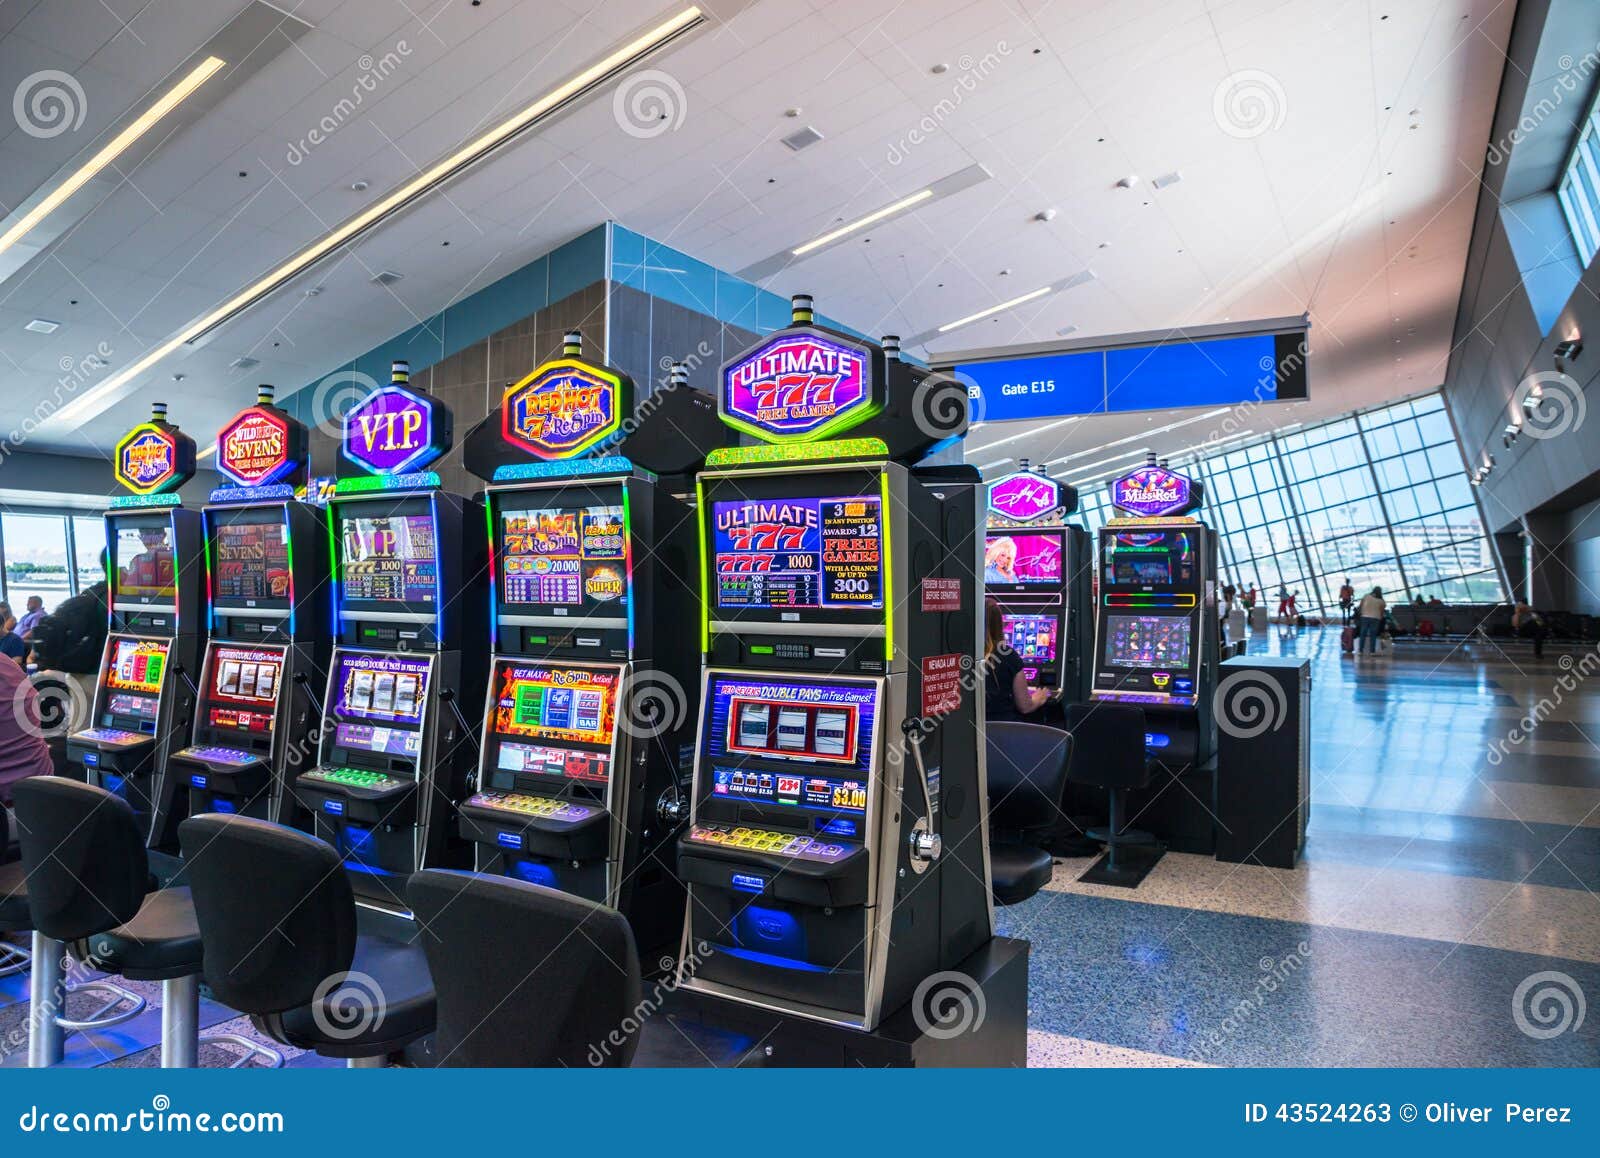 When you land at McCarran International Airport you know you're in Las Vegas when you see and hear the sights and sounds of slot machines.If you're over 21, enjoy one of Las Vegas visitors' favorite pastimes and spend a few minutes at one of our slot machines located throughout the airport.